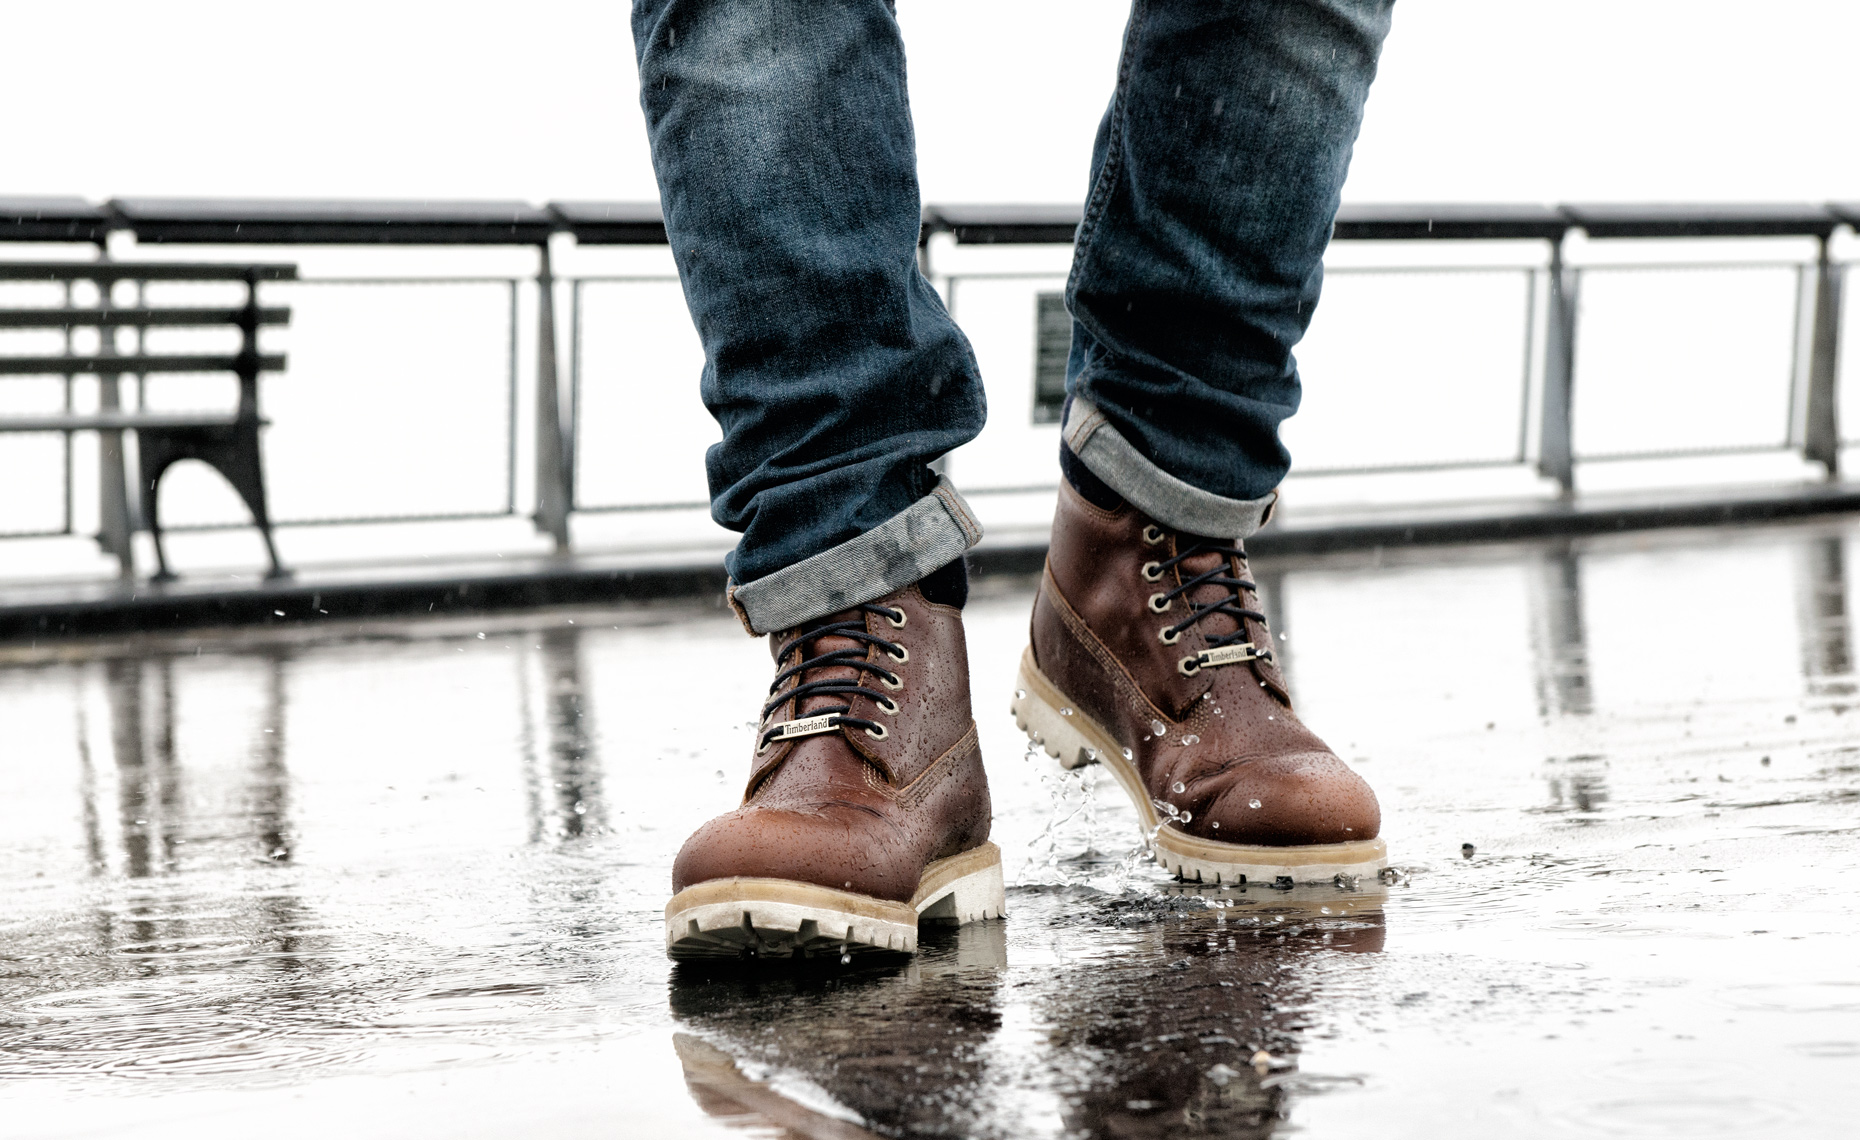 Global release of the Timberland AW15 Markmakers Campaign: Recycled Brooklyn, NY